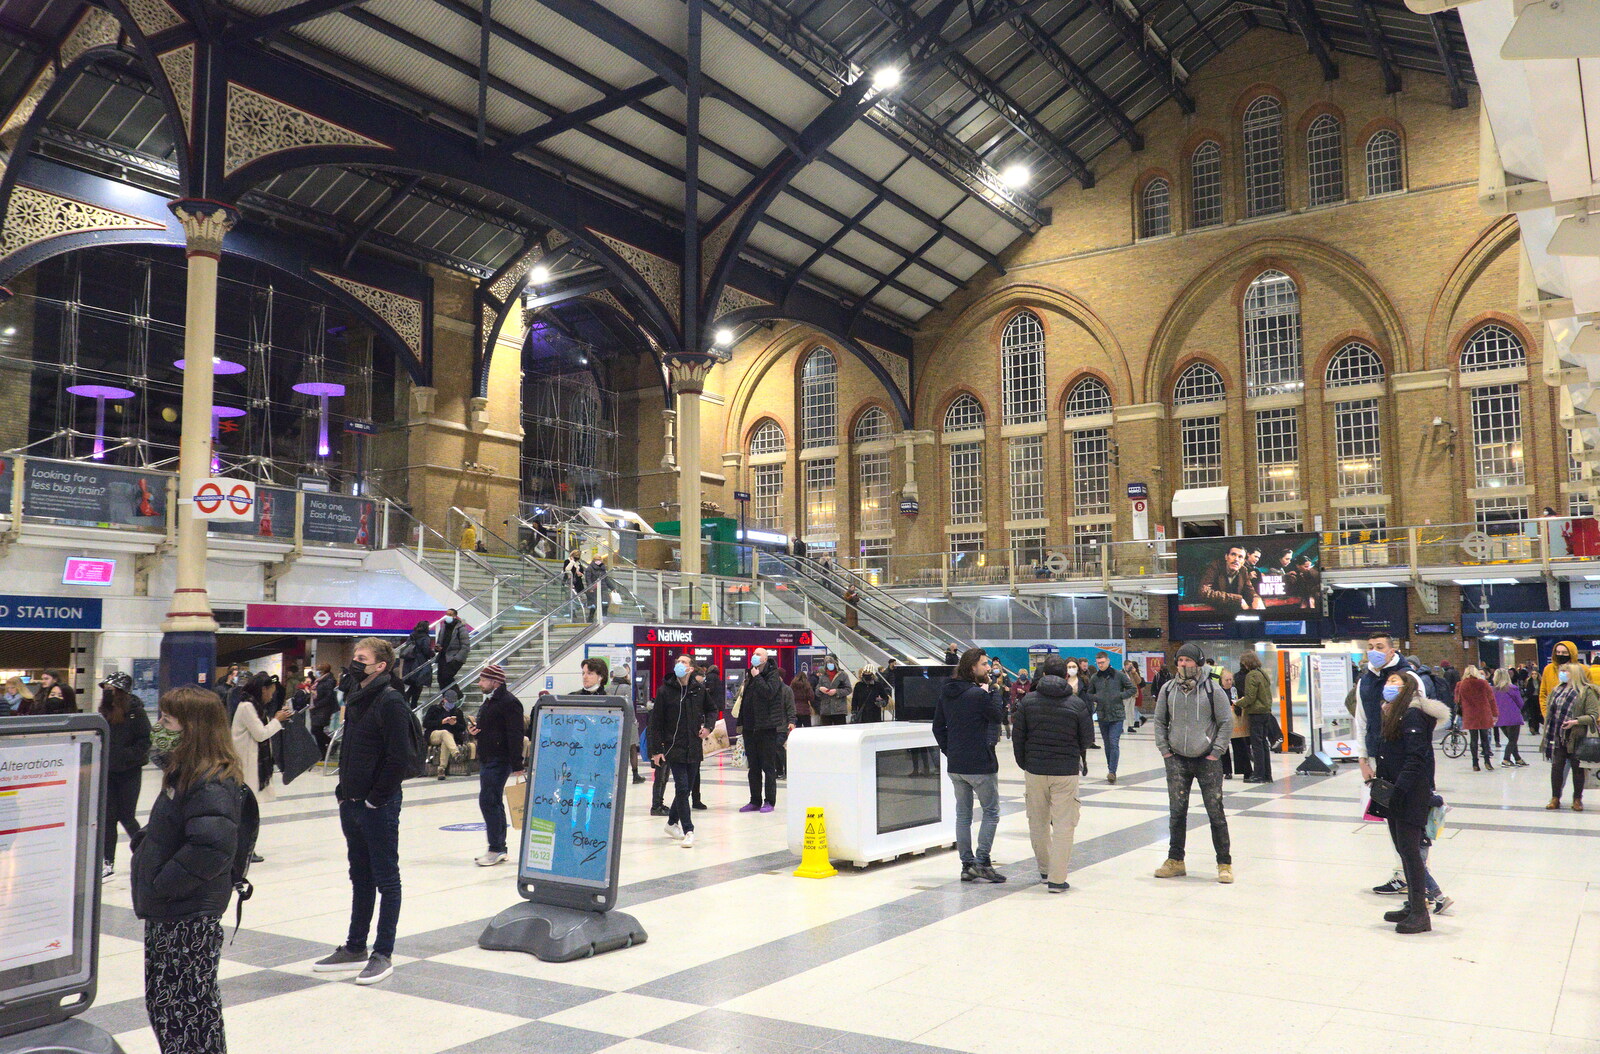 A view of the Liverpool Street concourse from A Trip to the Natural History Museum, Kensington, London - 15th January 2022